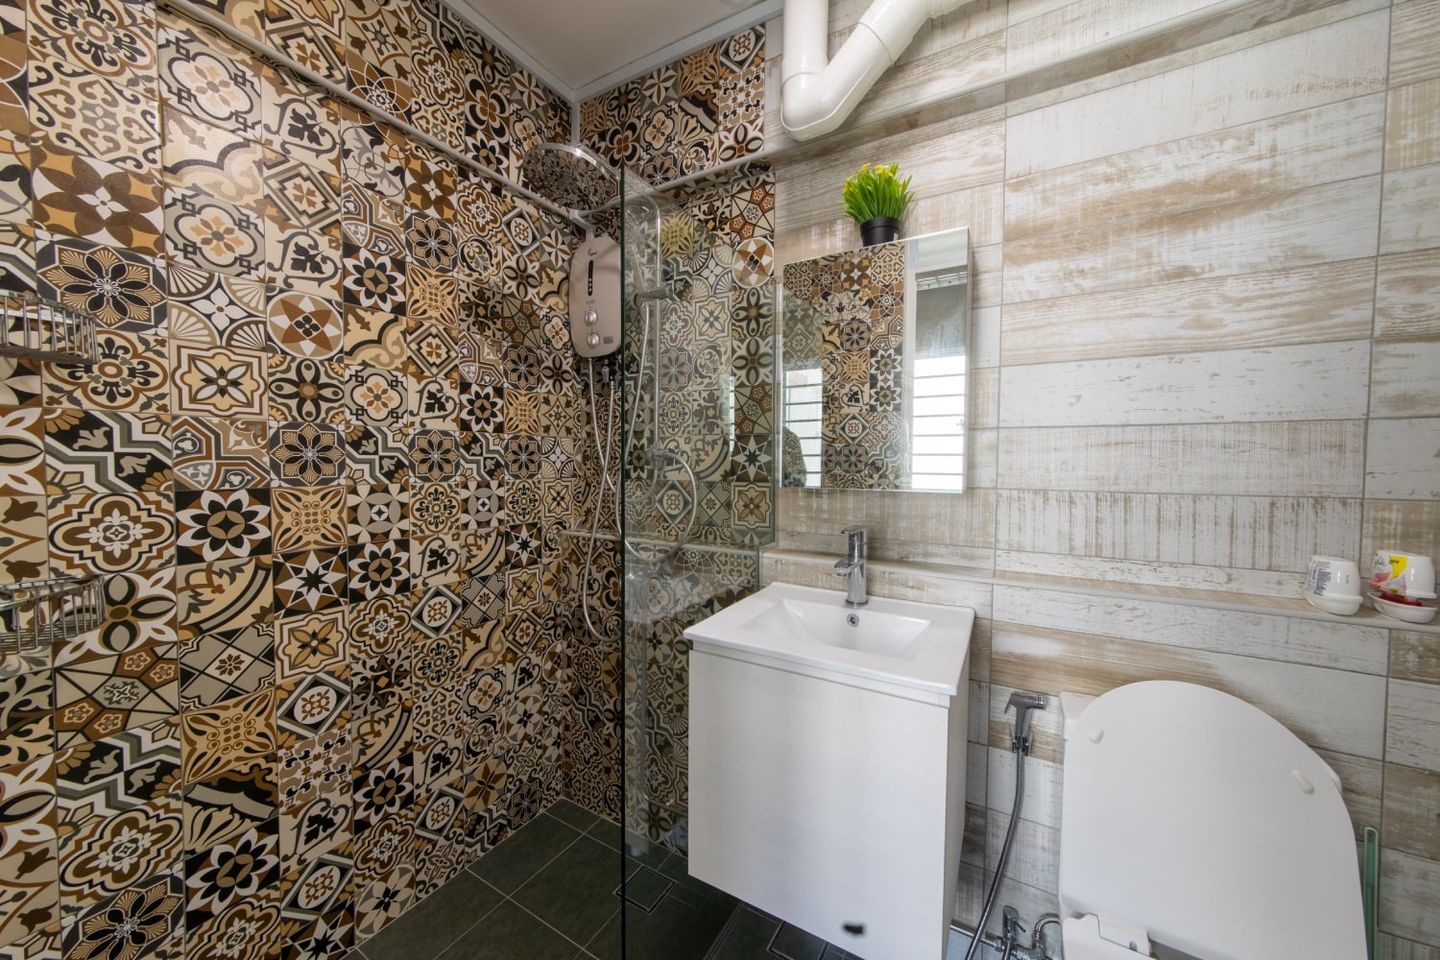 Modern Bathroom Design With Patterned Wall Tiles